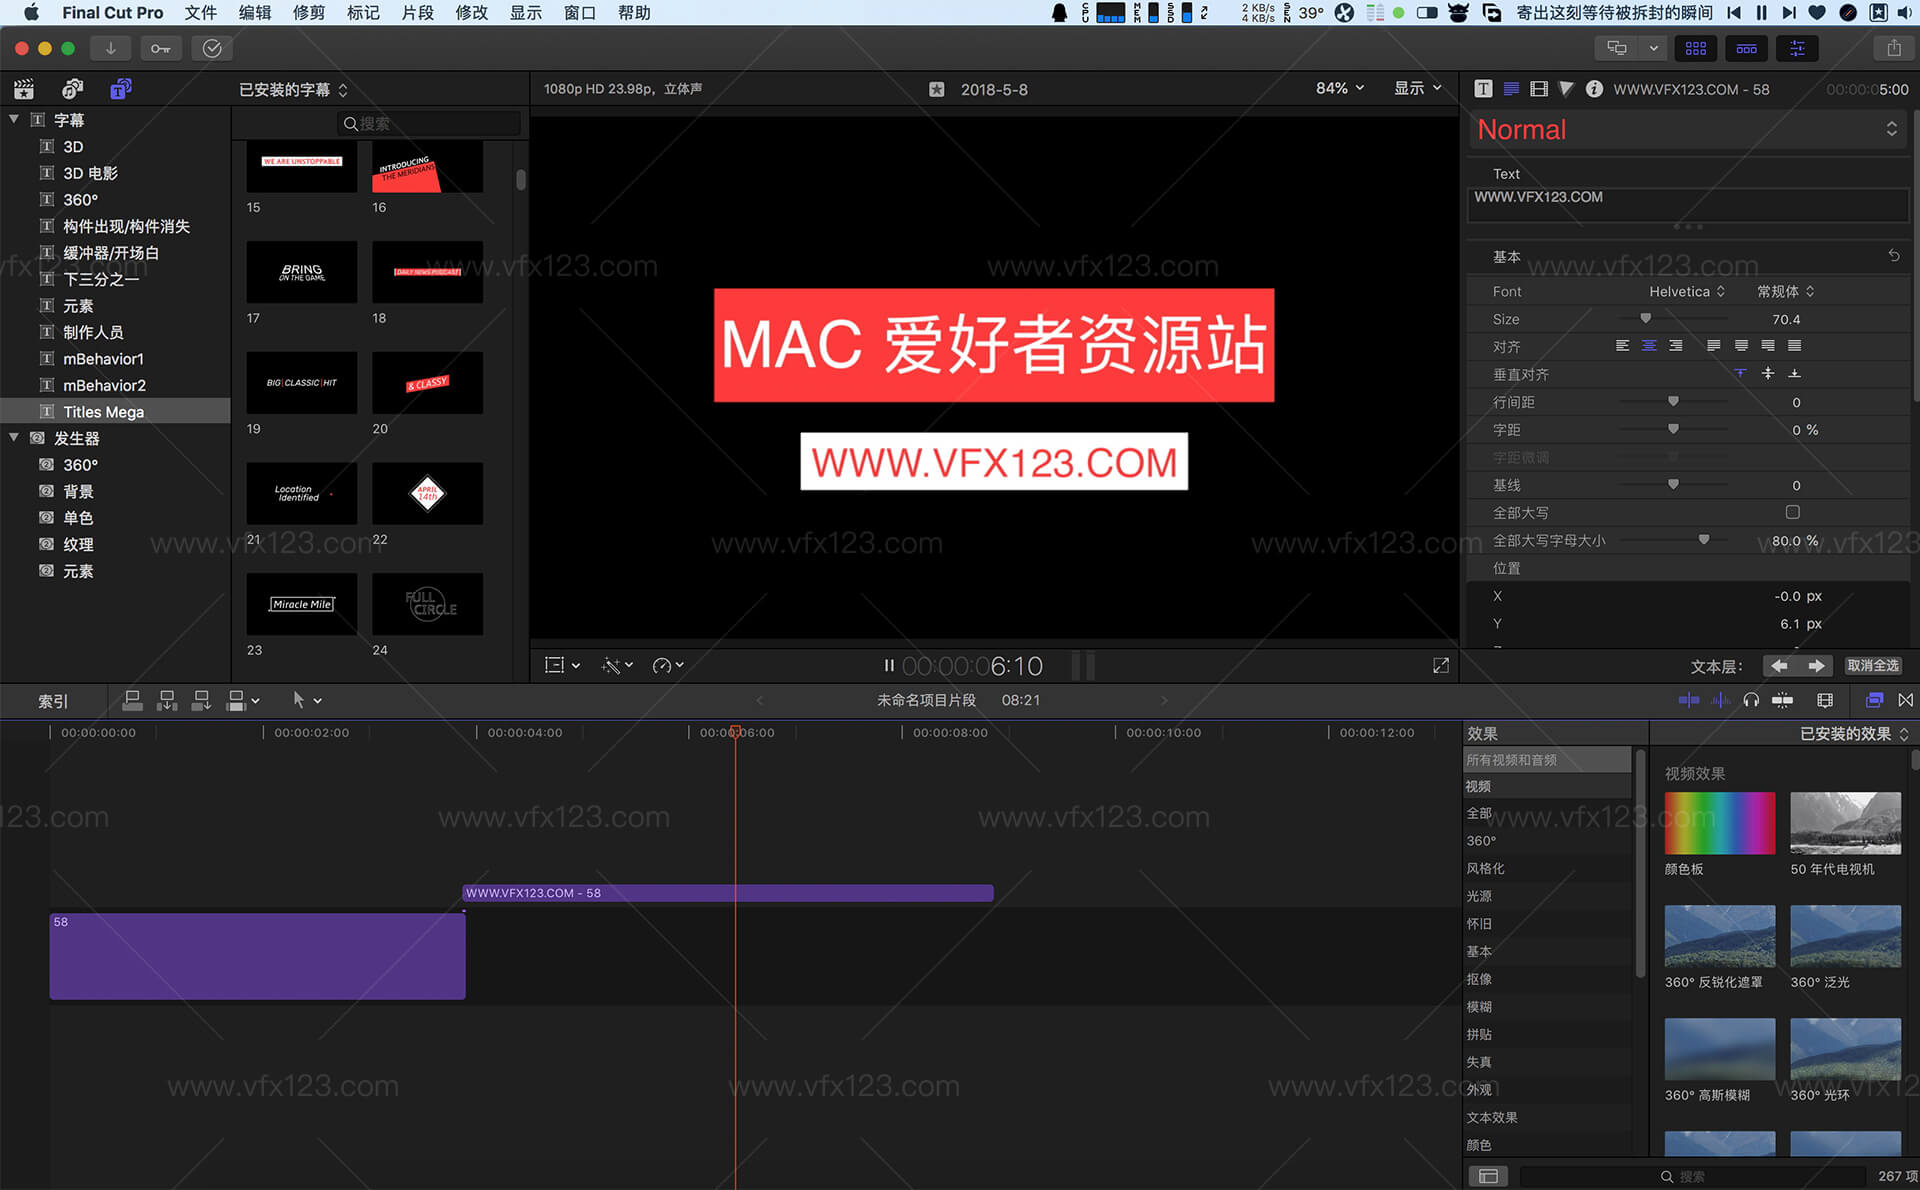 export from final cut pro 10.3.4